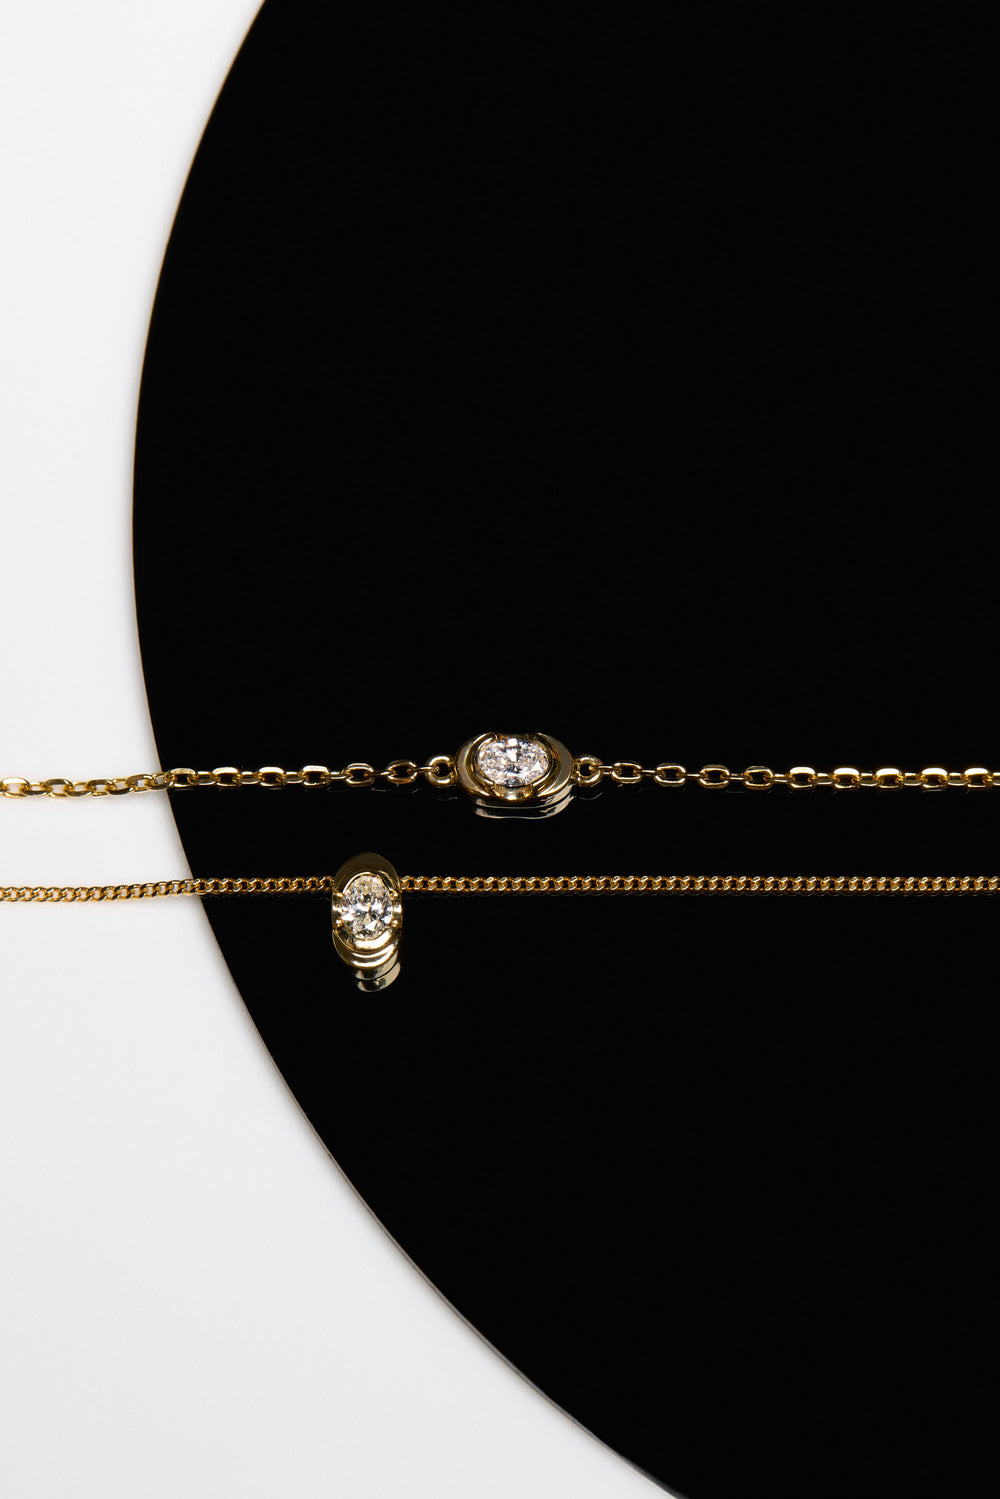 Mini Oval Diamond Necklace | 9K Yellow or Rose Gold, More Options Available| Natasha Schweitzer